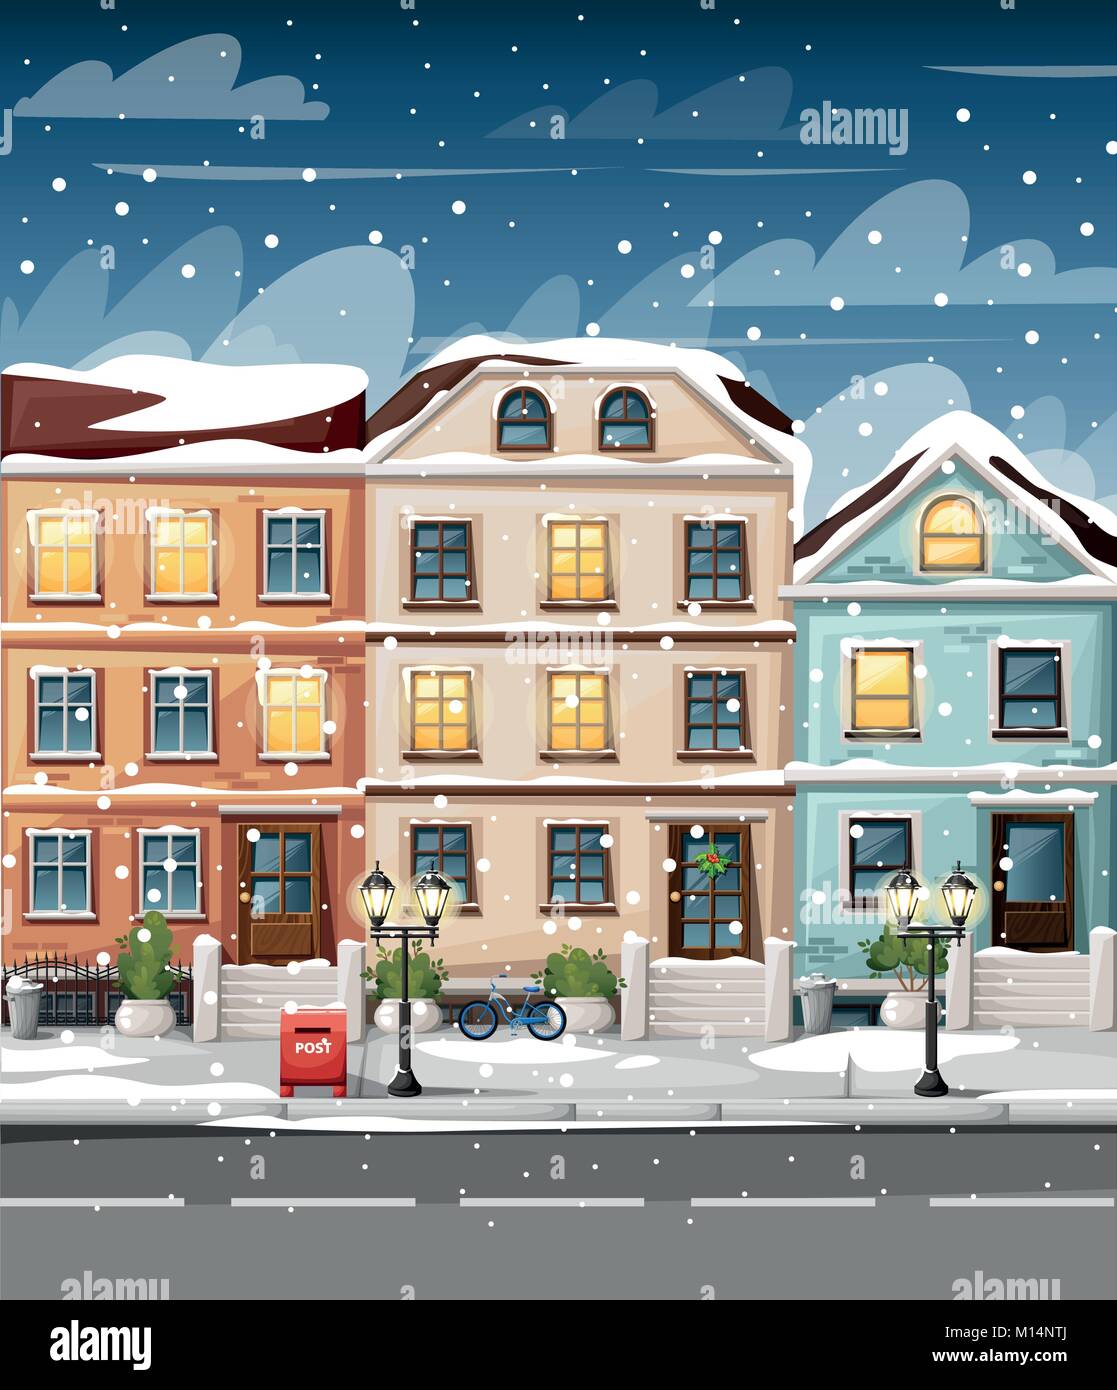 Snow-covered street with colorful houses lights bench red mailbox and bushes in vases cartoon style vector illustration website page and mobile app de Stock Vector